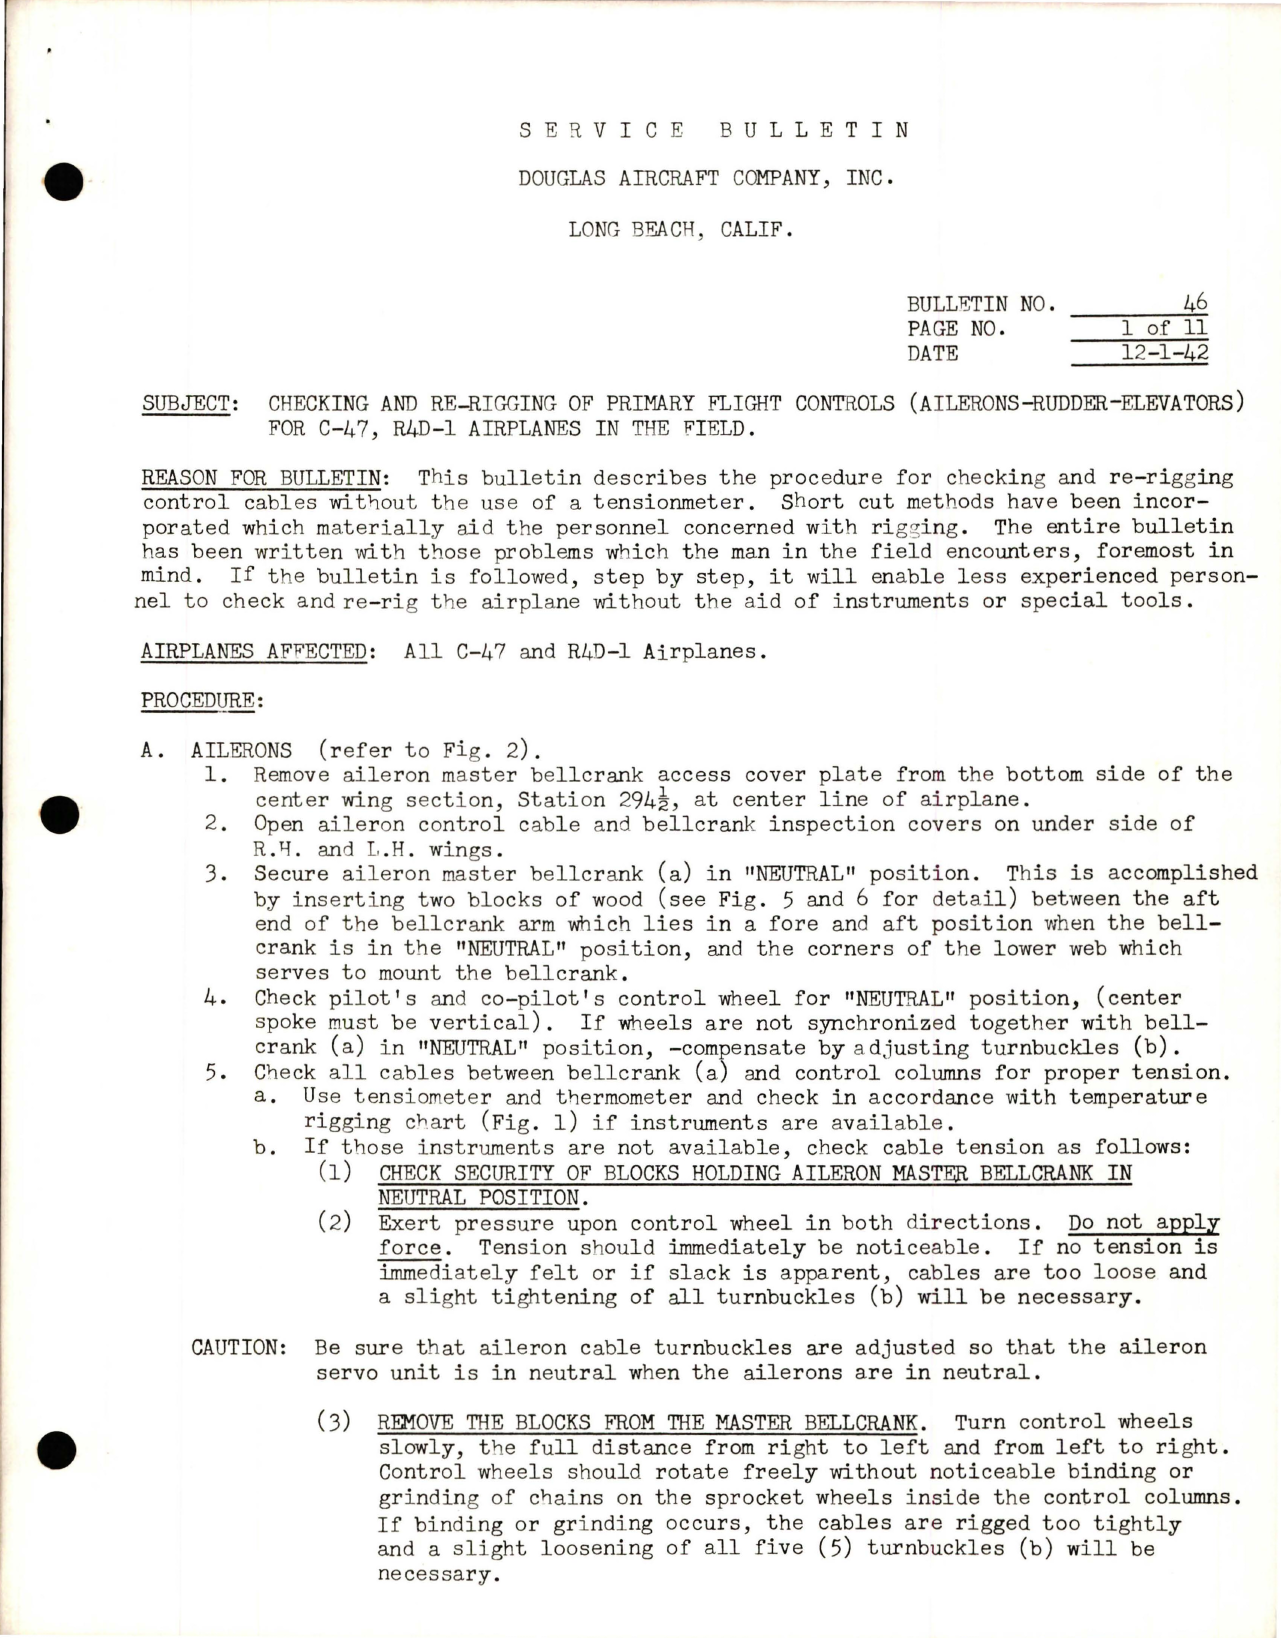 Sample page 1 from AirCorps Library document: Checking and Re-Rigging of Primary Flight Controls (Ailerons-Rudder-Elevators)